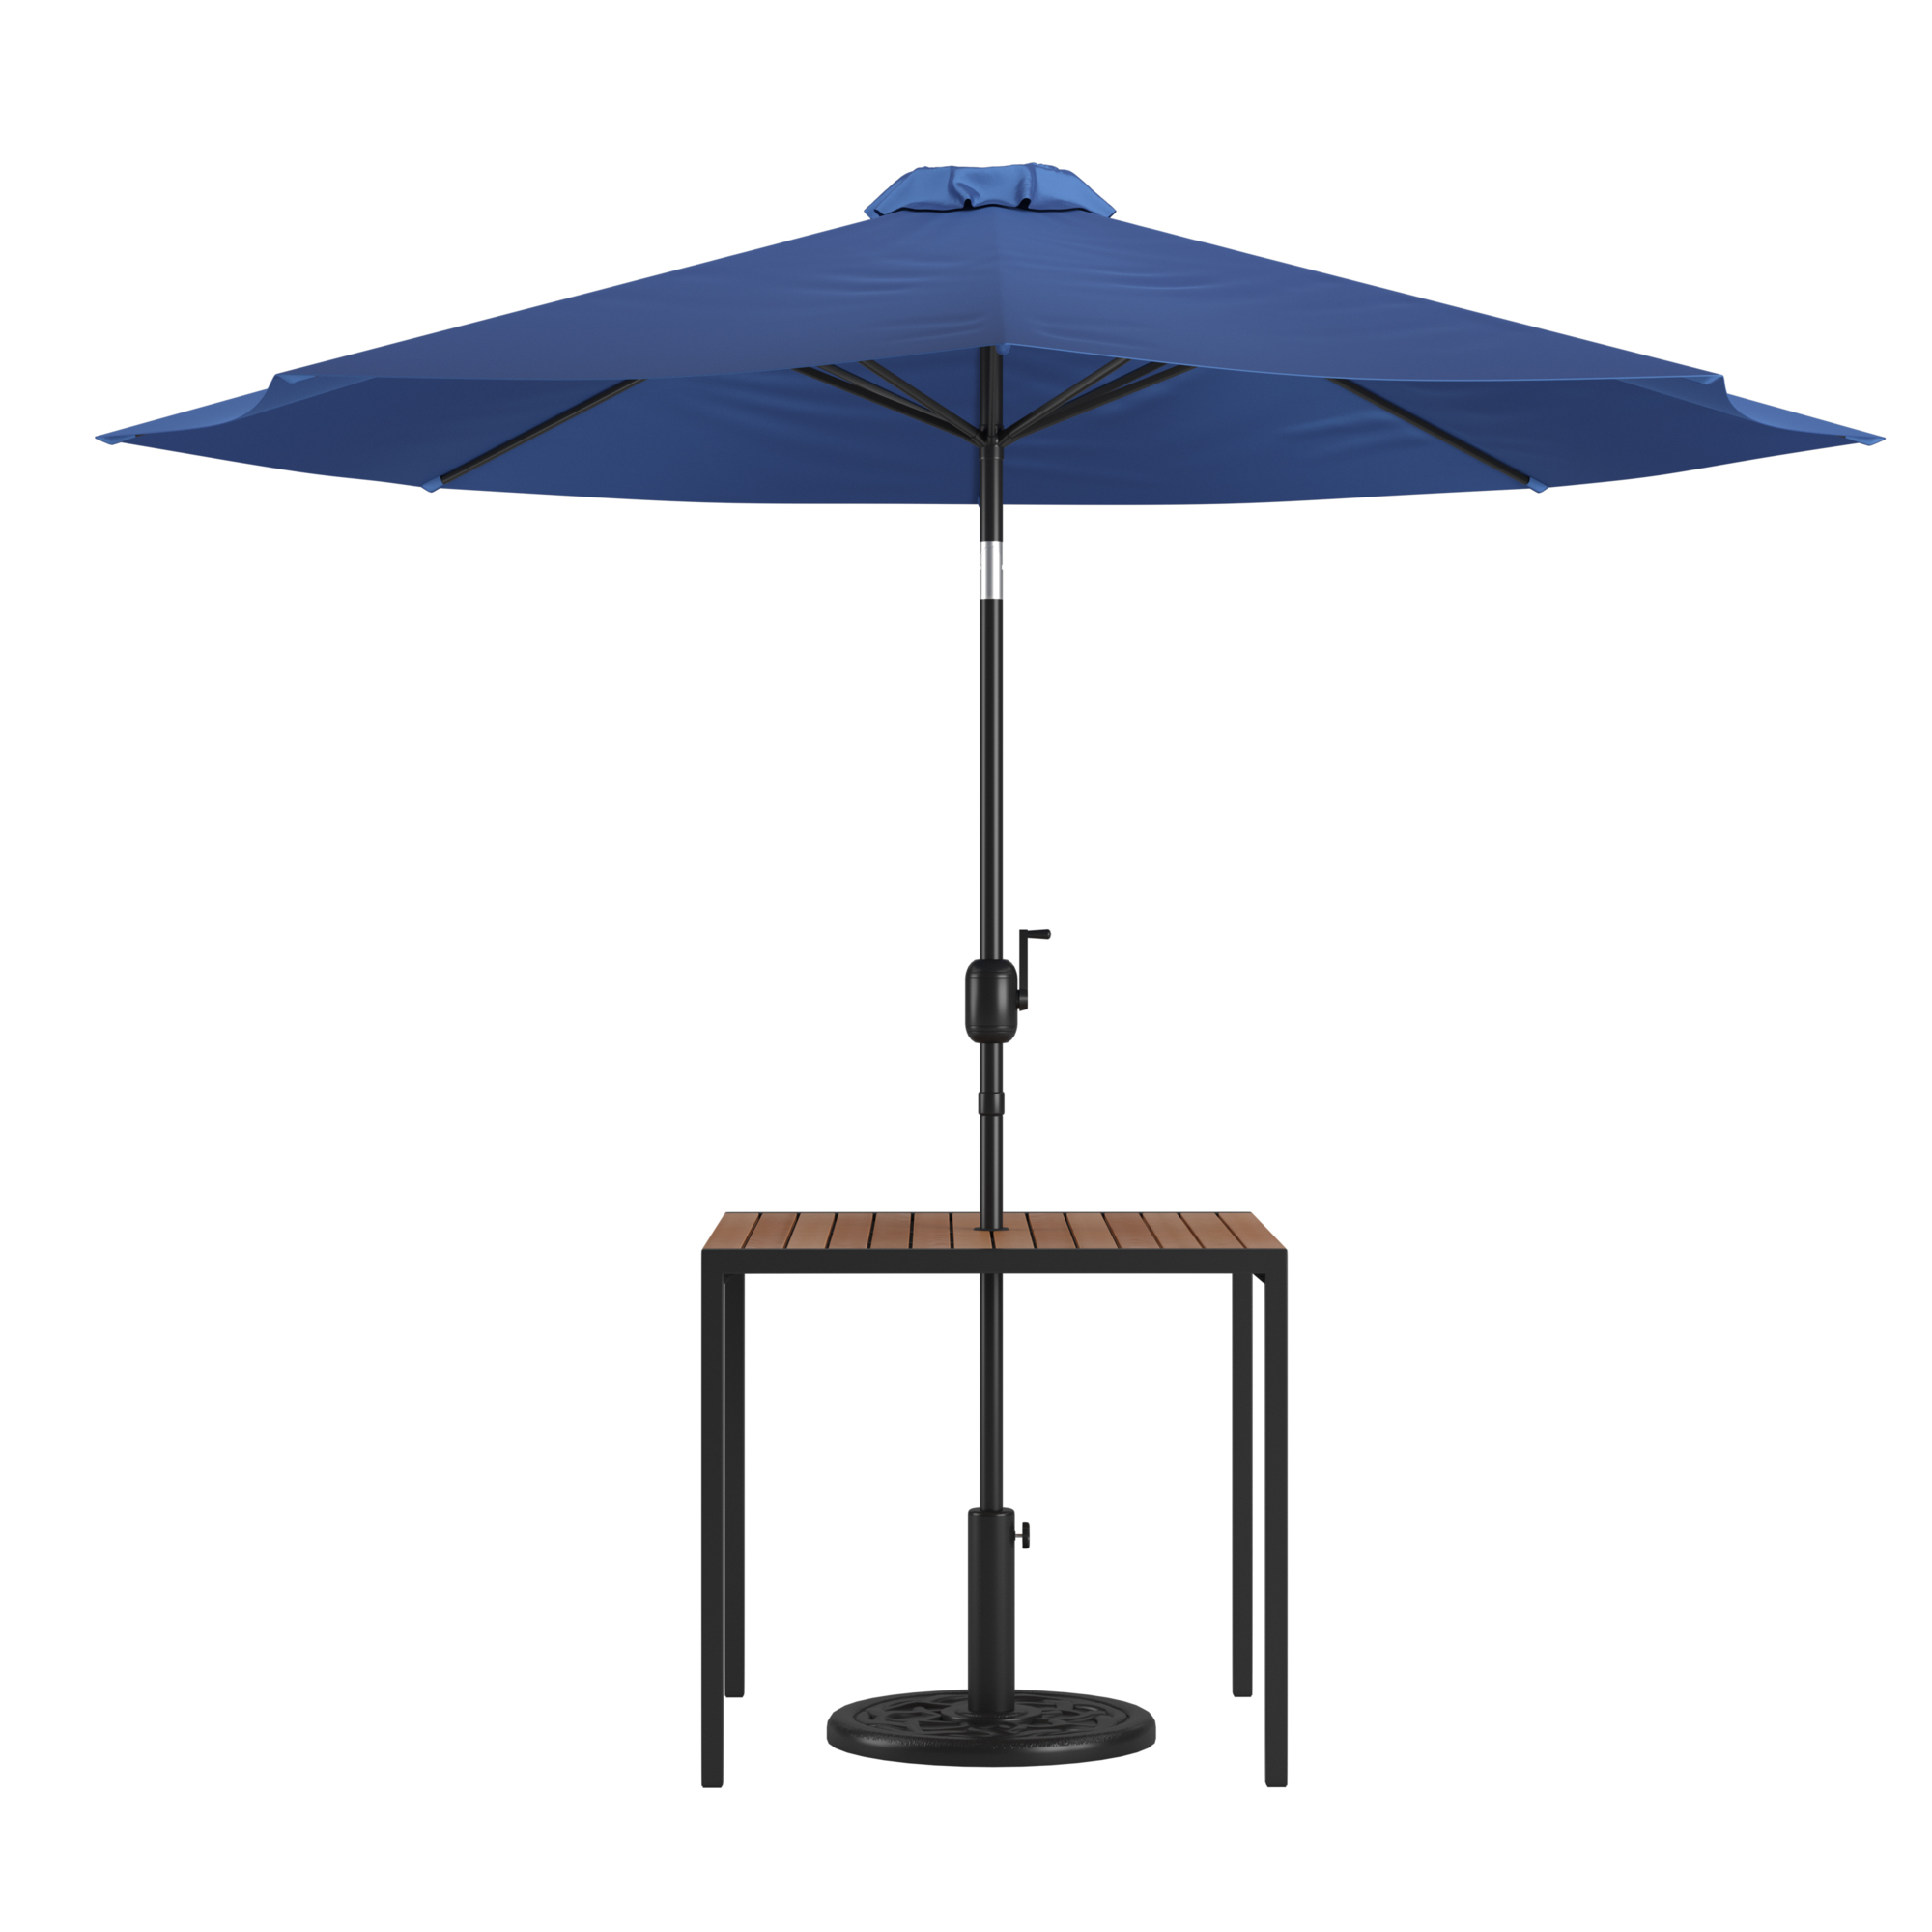 Flash Furniture, Faux Teak 35Inch Patio Table-Navy Umbrella Base, Table Shape Square, Primary Color Blue, Height 29.5 in, Model XU8100UB19BNV